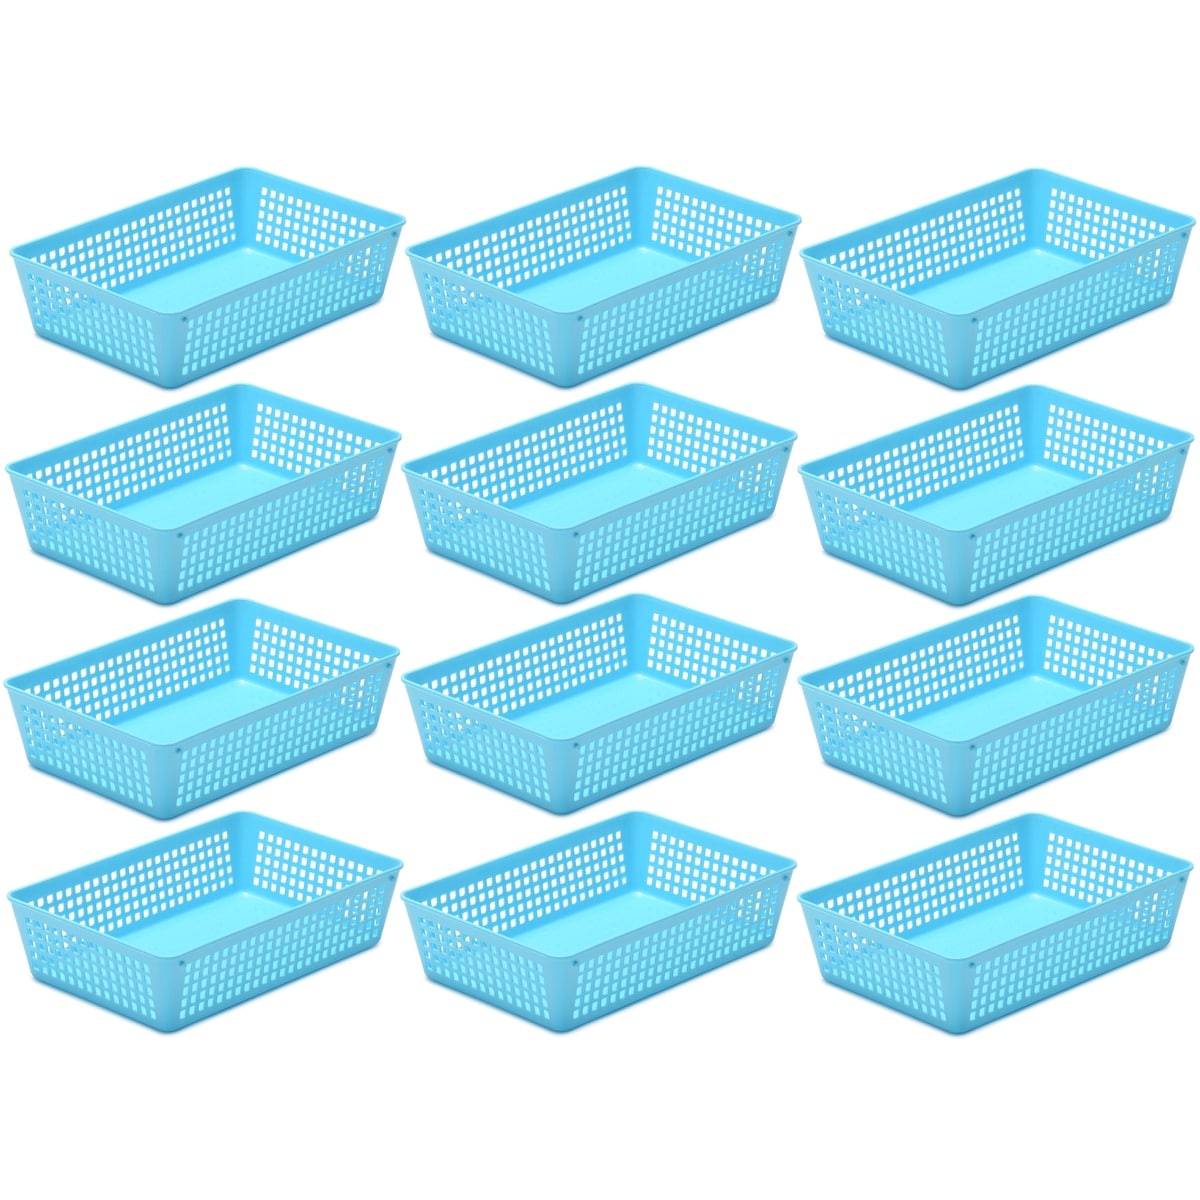 https://ak1.ostkcdn.com/images/products/is/images/direct/acc6478aadd462f9730b994882bcc375f71247cc/12-Pack-Plastic-Storage-Baskets-for-Office-Drawer%2C-Classroom-Desk.jpg